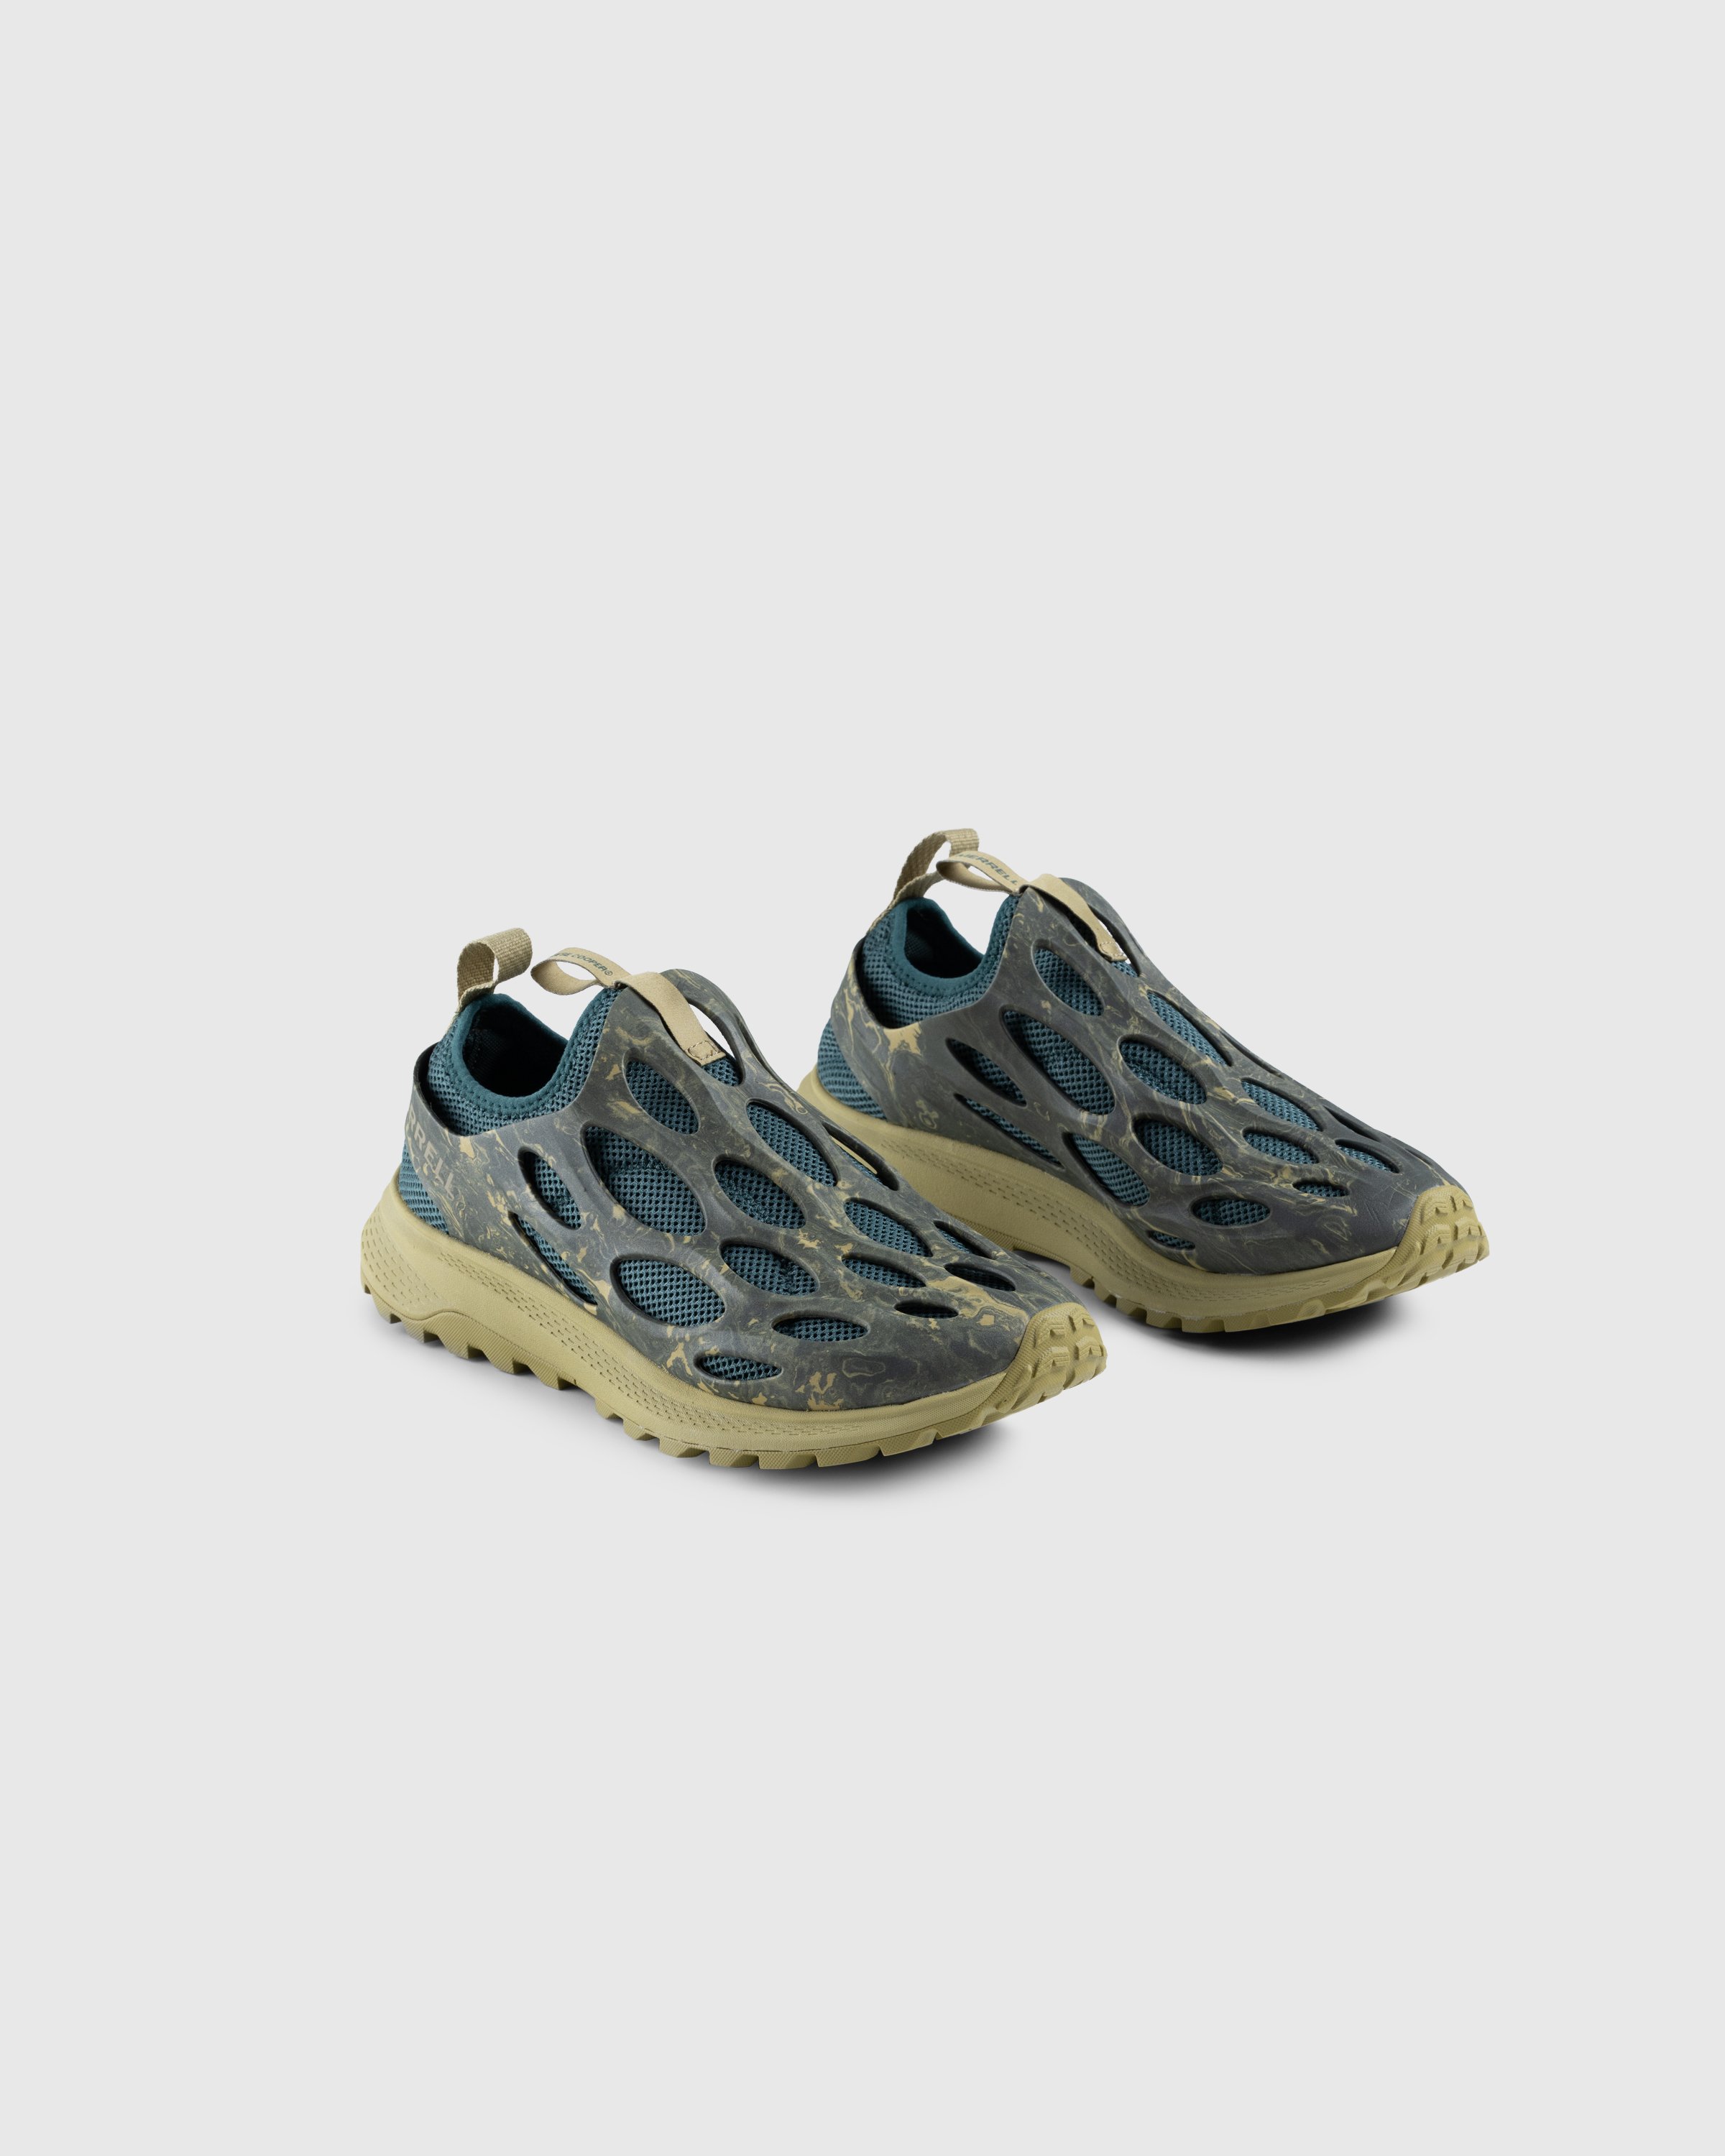 Merrell x Reese Cooper - Hydro Runner Forest Night - Footwear - Green - Image 3